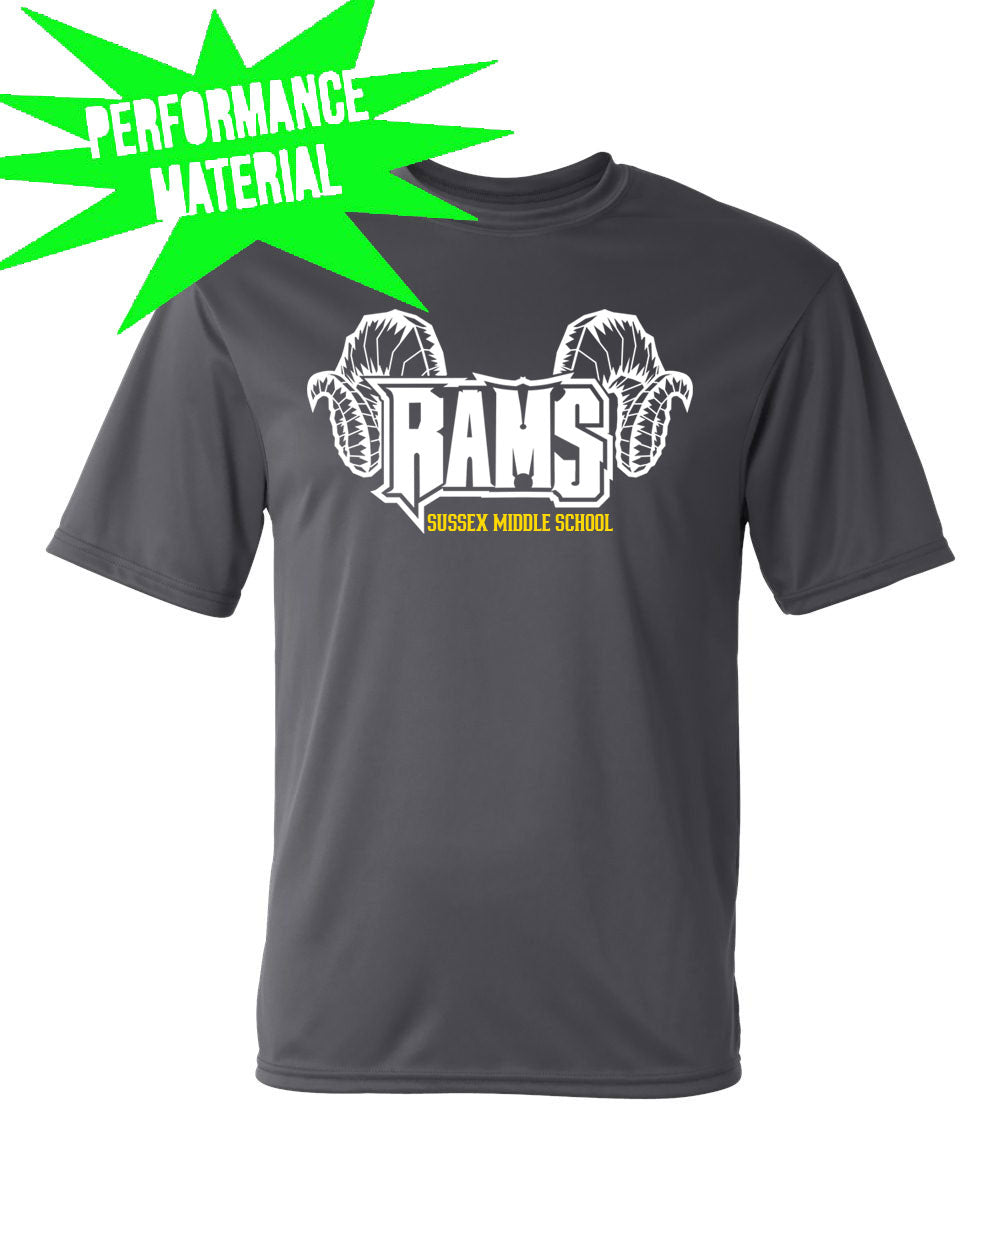 Sussex Middle Performance Material design 1 T-Shirt